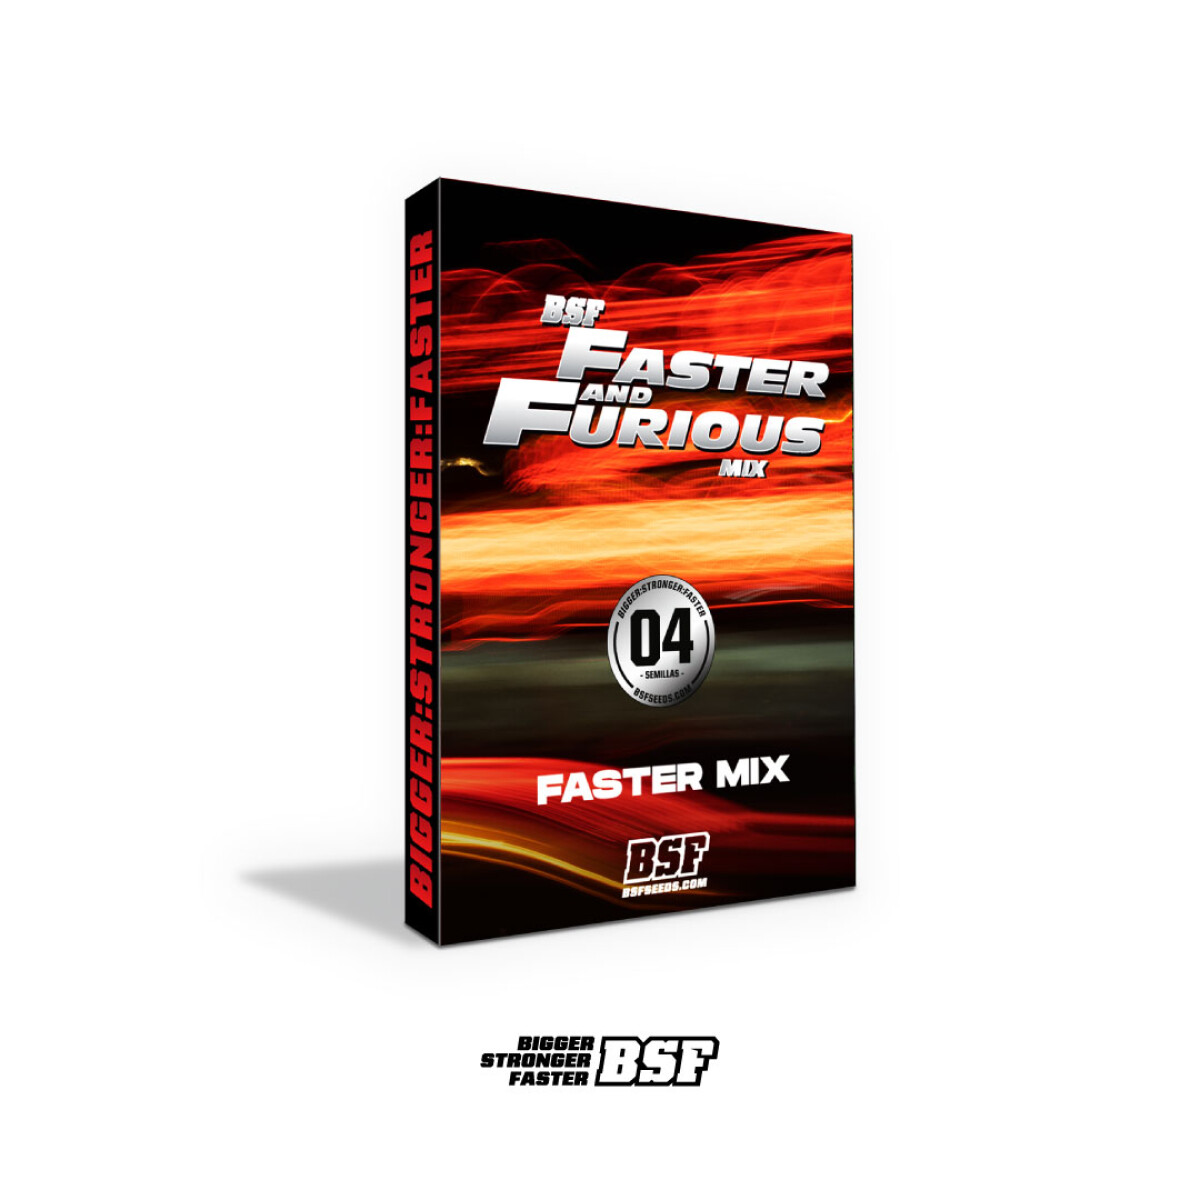 FAST AND FURIOUS FEMINIZED MIX | X12 UNIDADES 